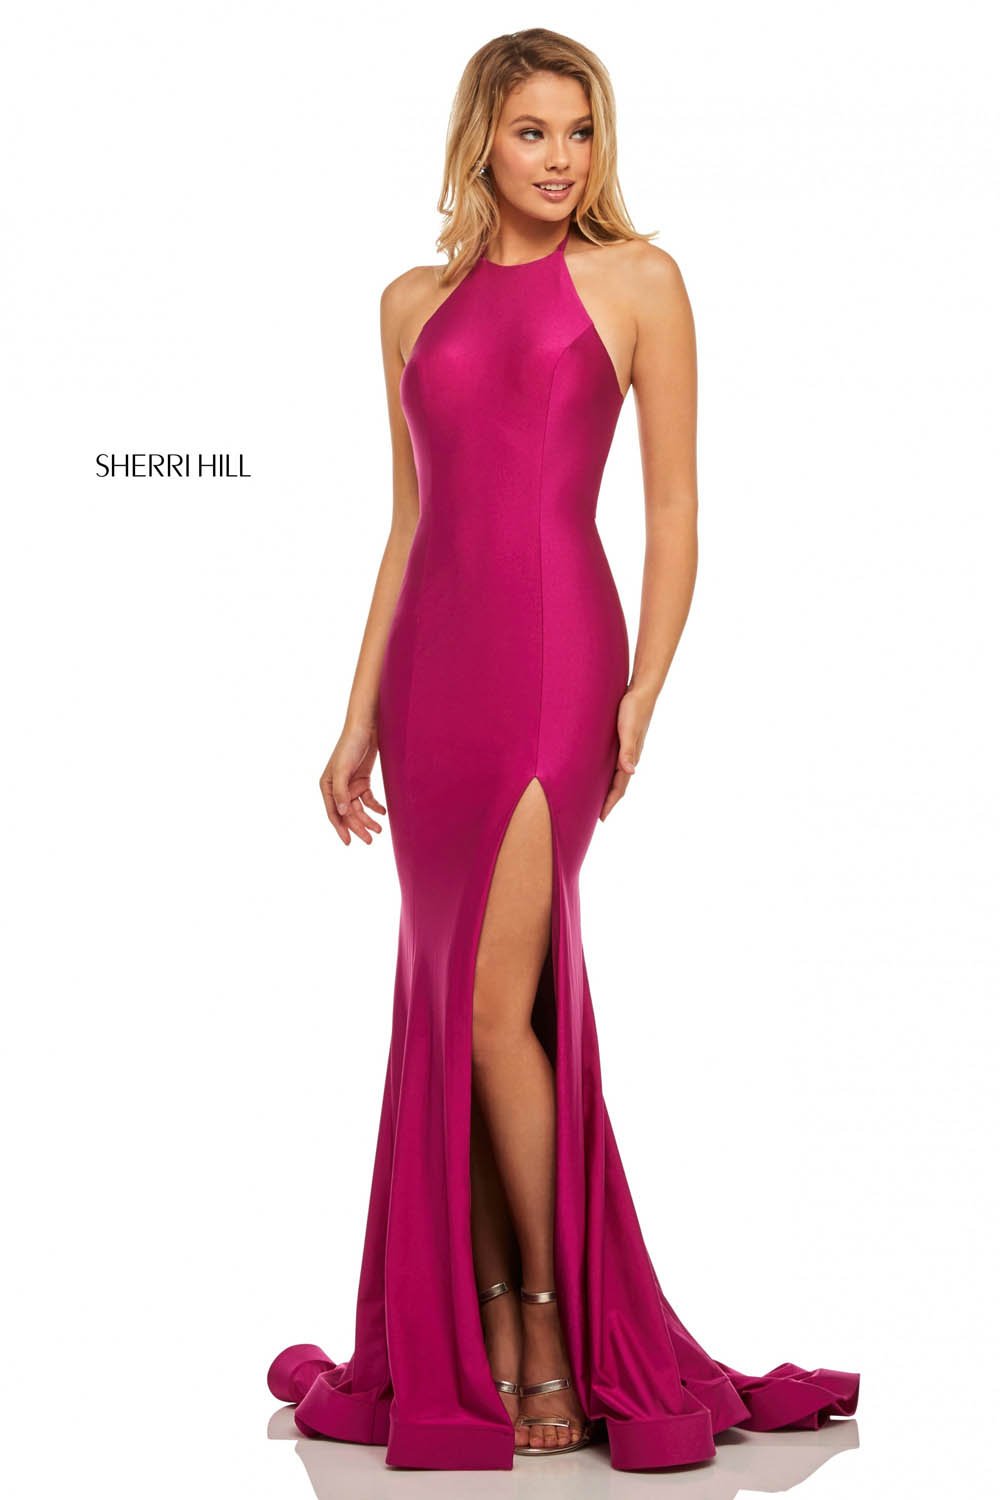 Sherri Hill 52782 dress images in these colors: Wine, Orchid, Royal, Black, Red, Navy, Light Blue, Yellow, Berry, Blush.